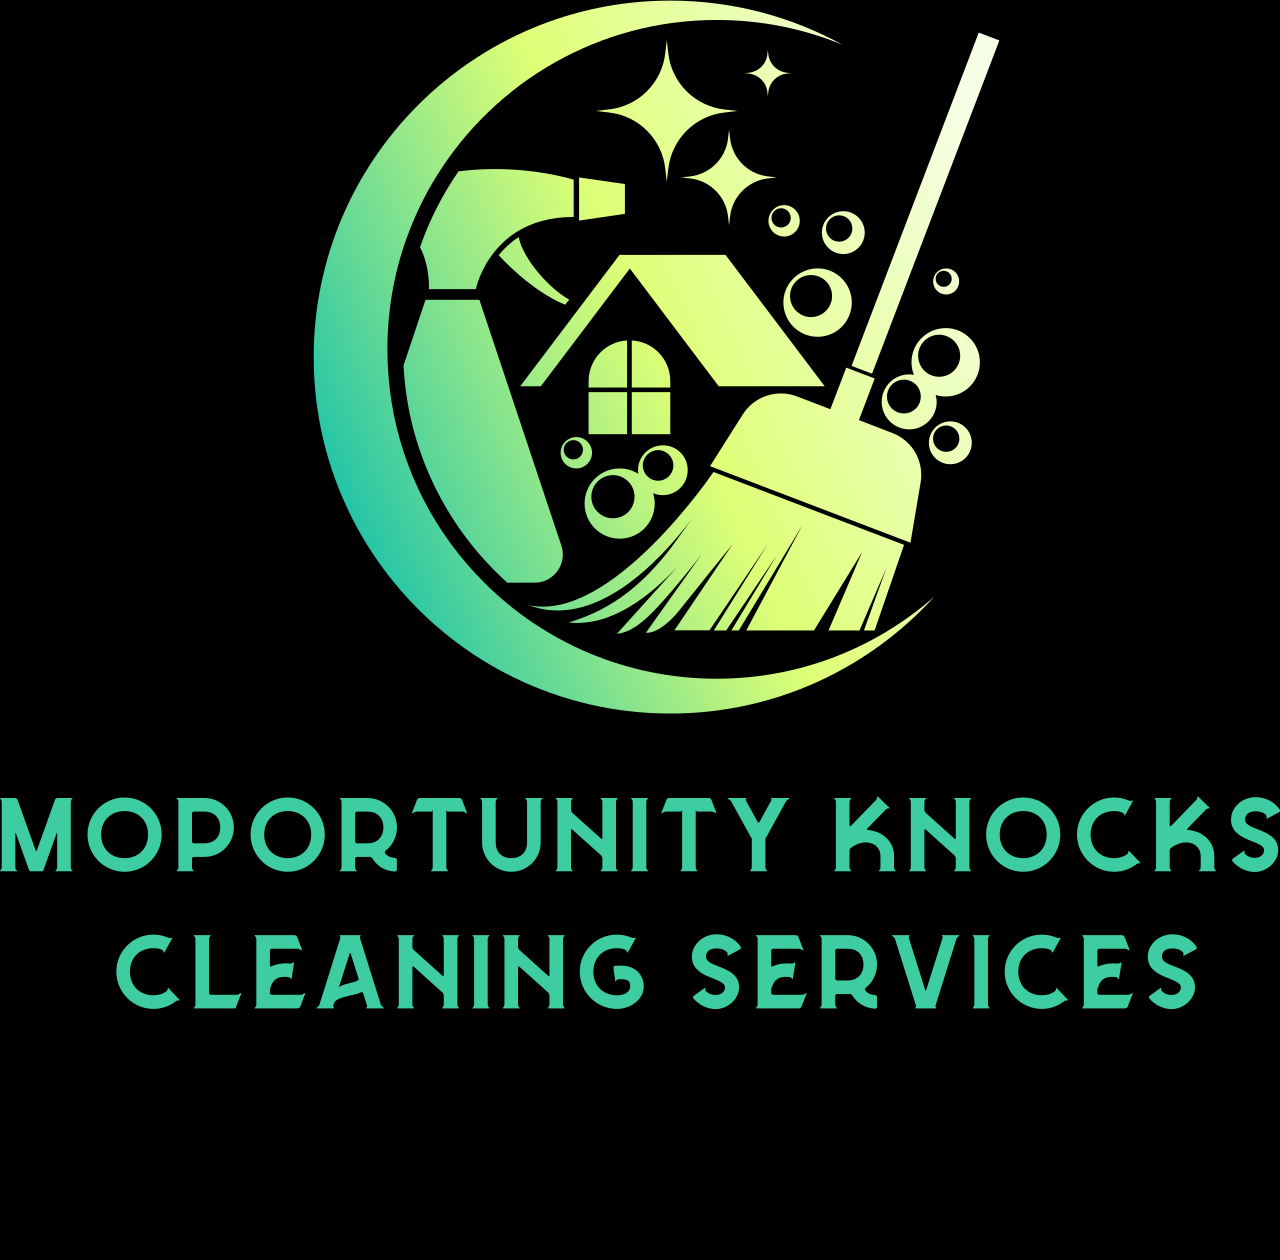 Moportunity Knocks Cleaning Services's logo